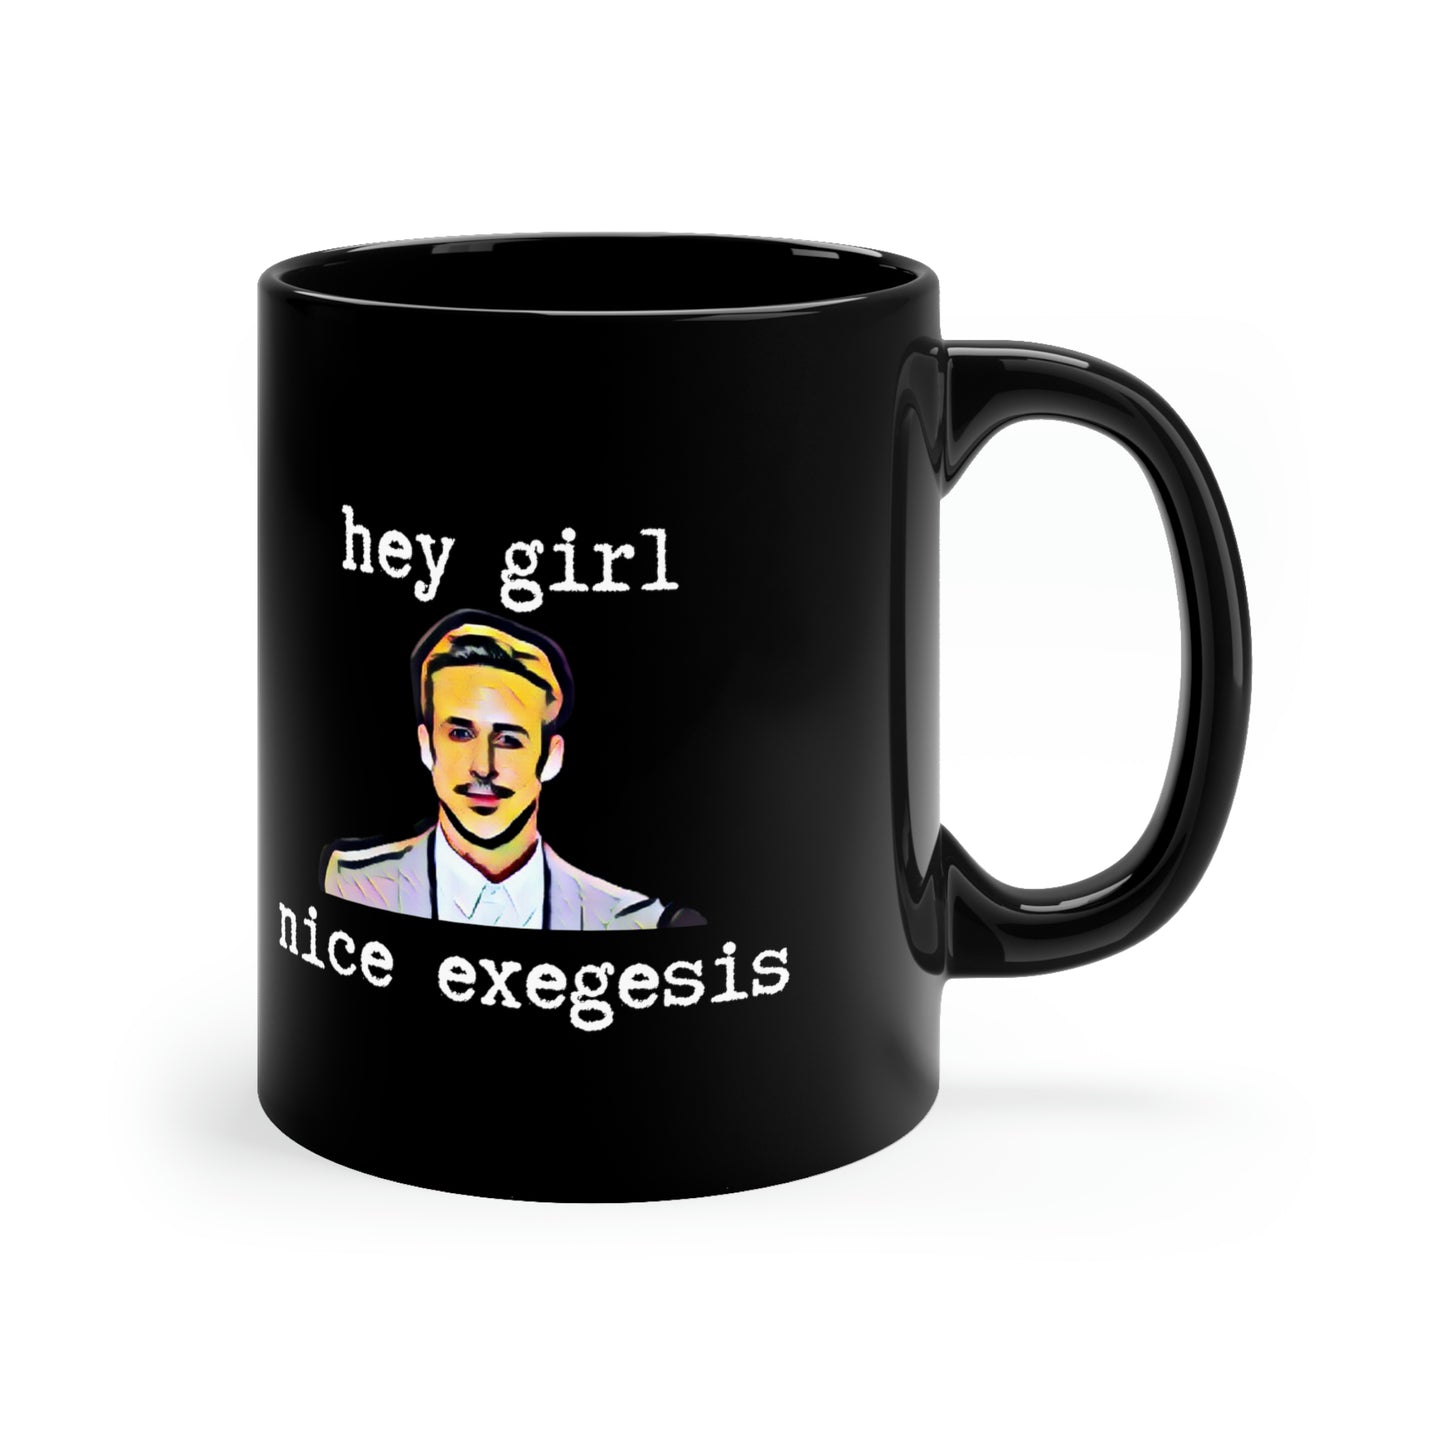 Fun Cup for Minister 11oz Black Mug Ryan Gosling Fun Cup for Minister Gift for Pastor Cup for Deacon Gift for Theologian Gift for Ordination